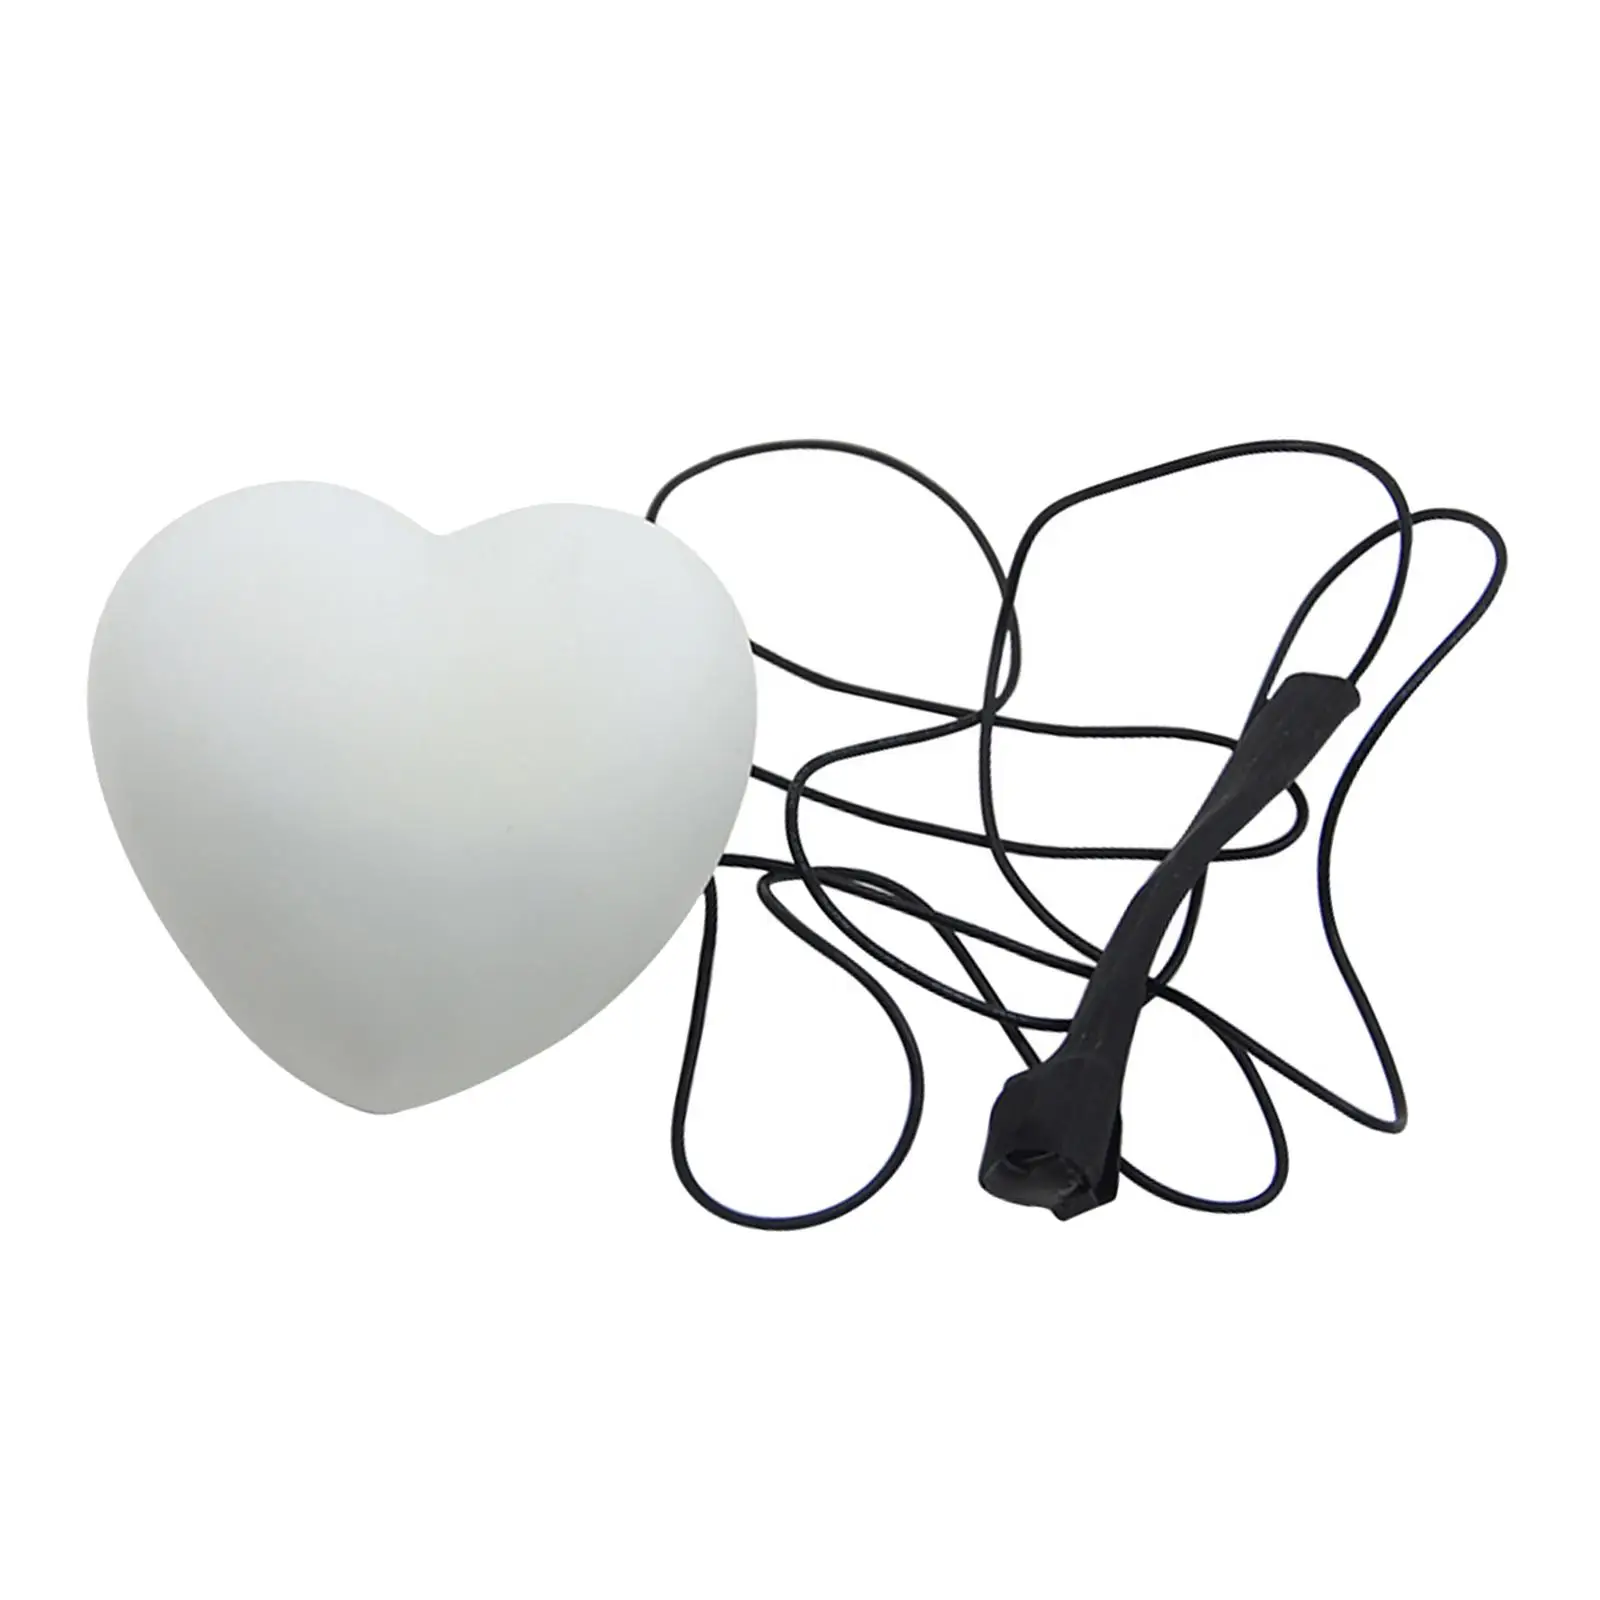 Light On Chest Magic Tricks Comedy Accessories Chest Love Lamp Magic Lights Decor Chest Heart Shaped for Anniversary Graduation